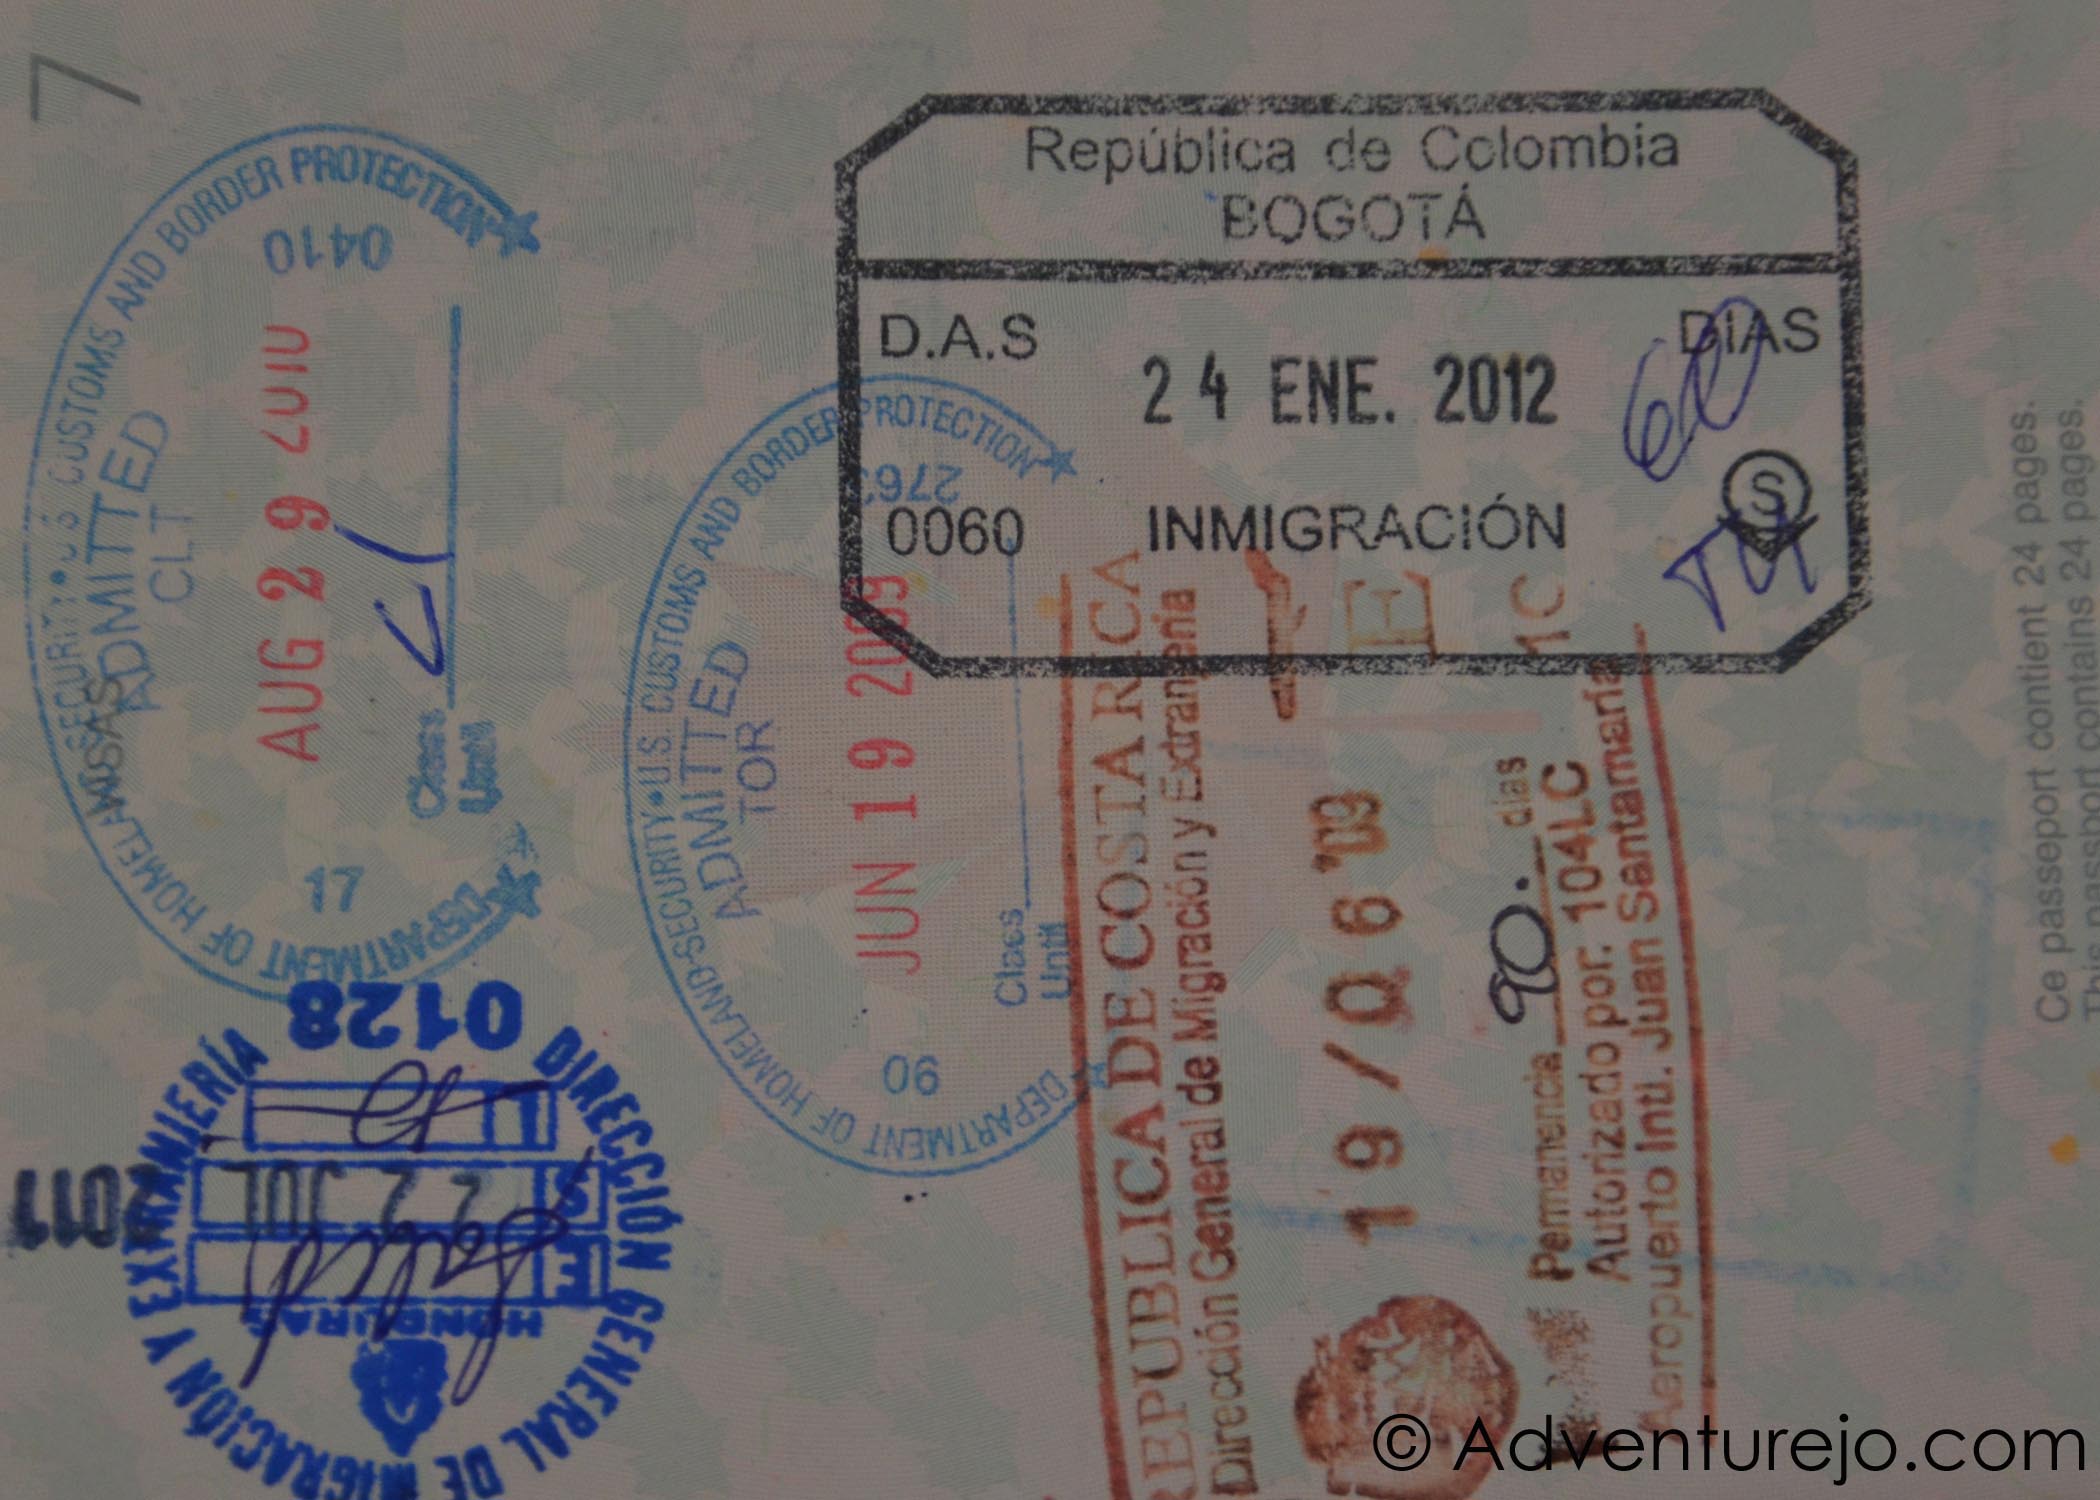 All you need to know about renewing your tourist visa in Colombia